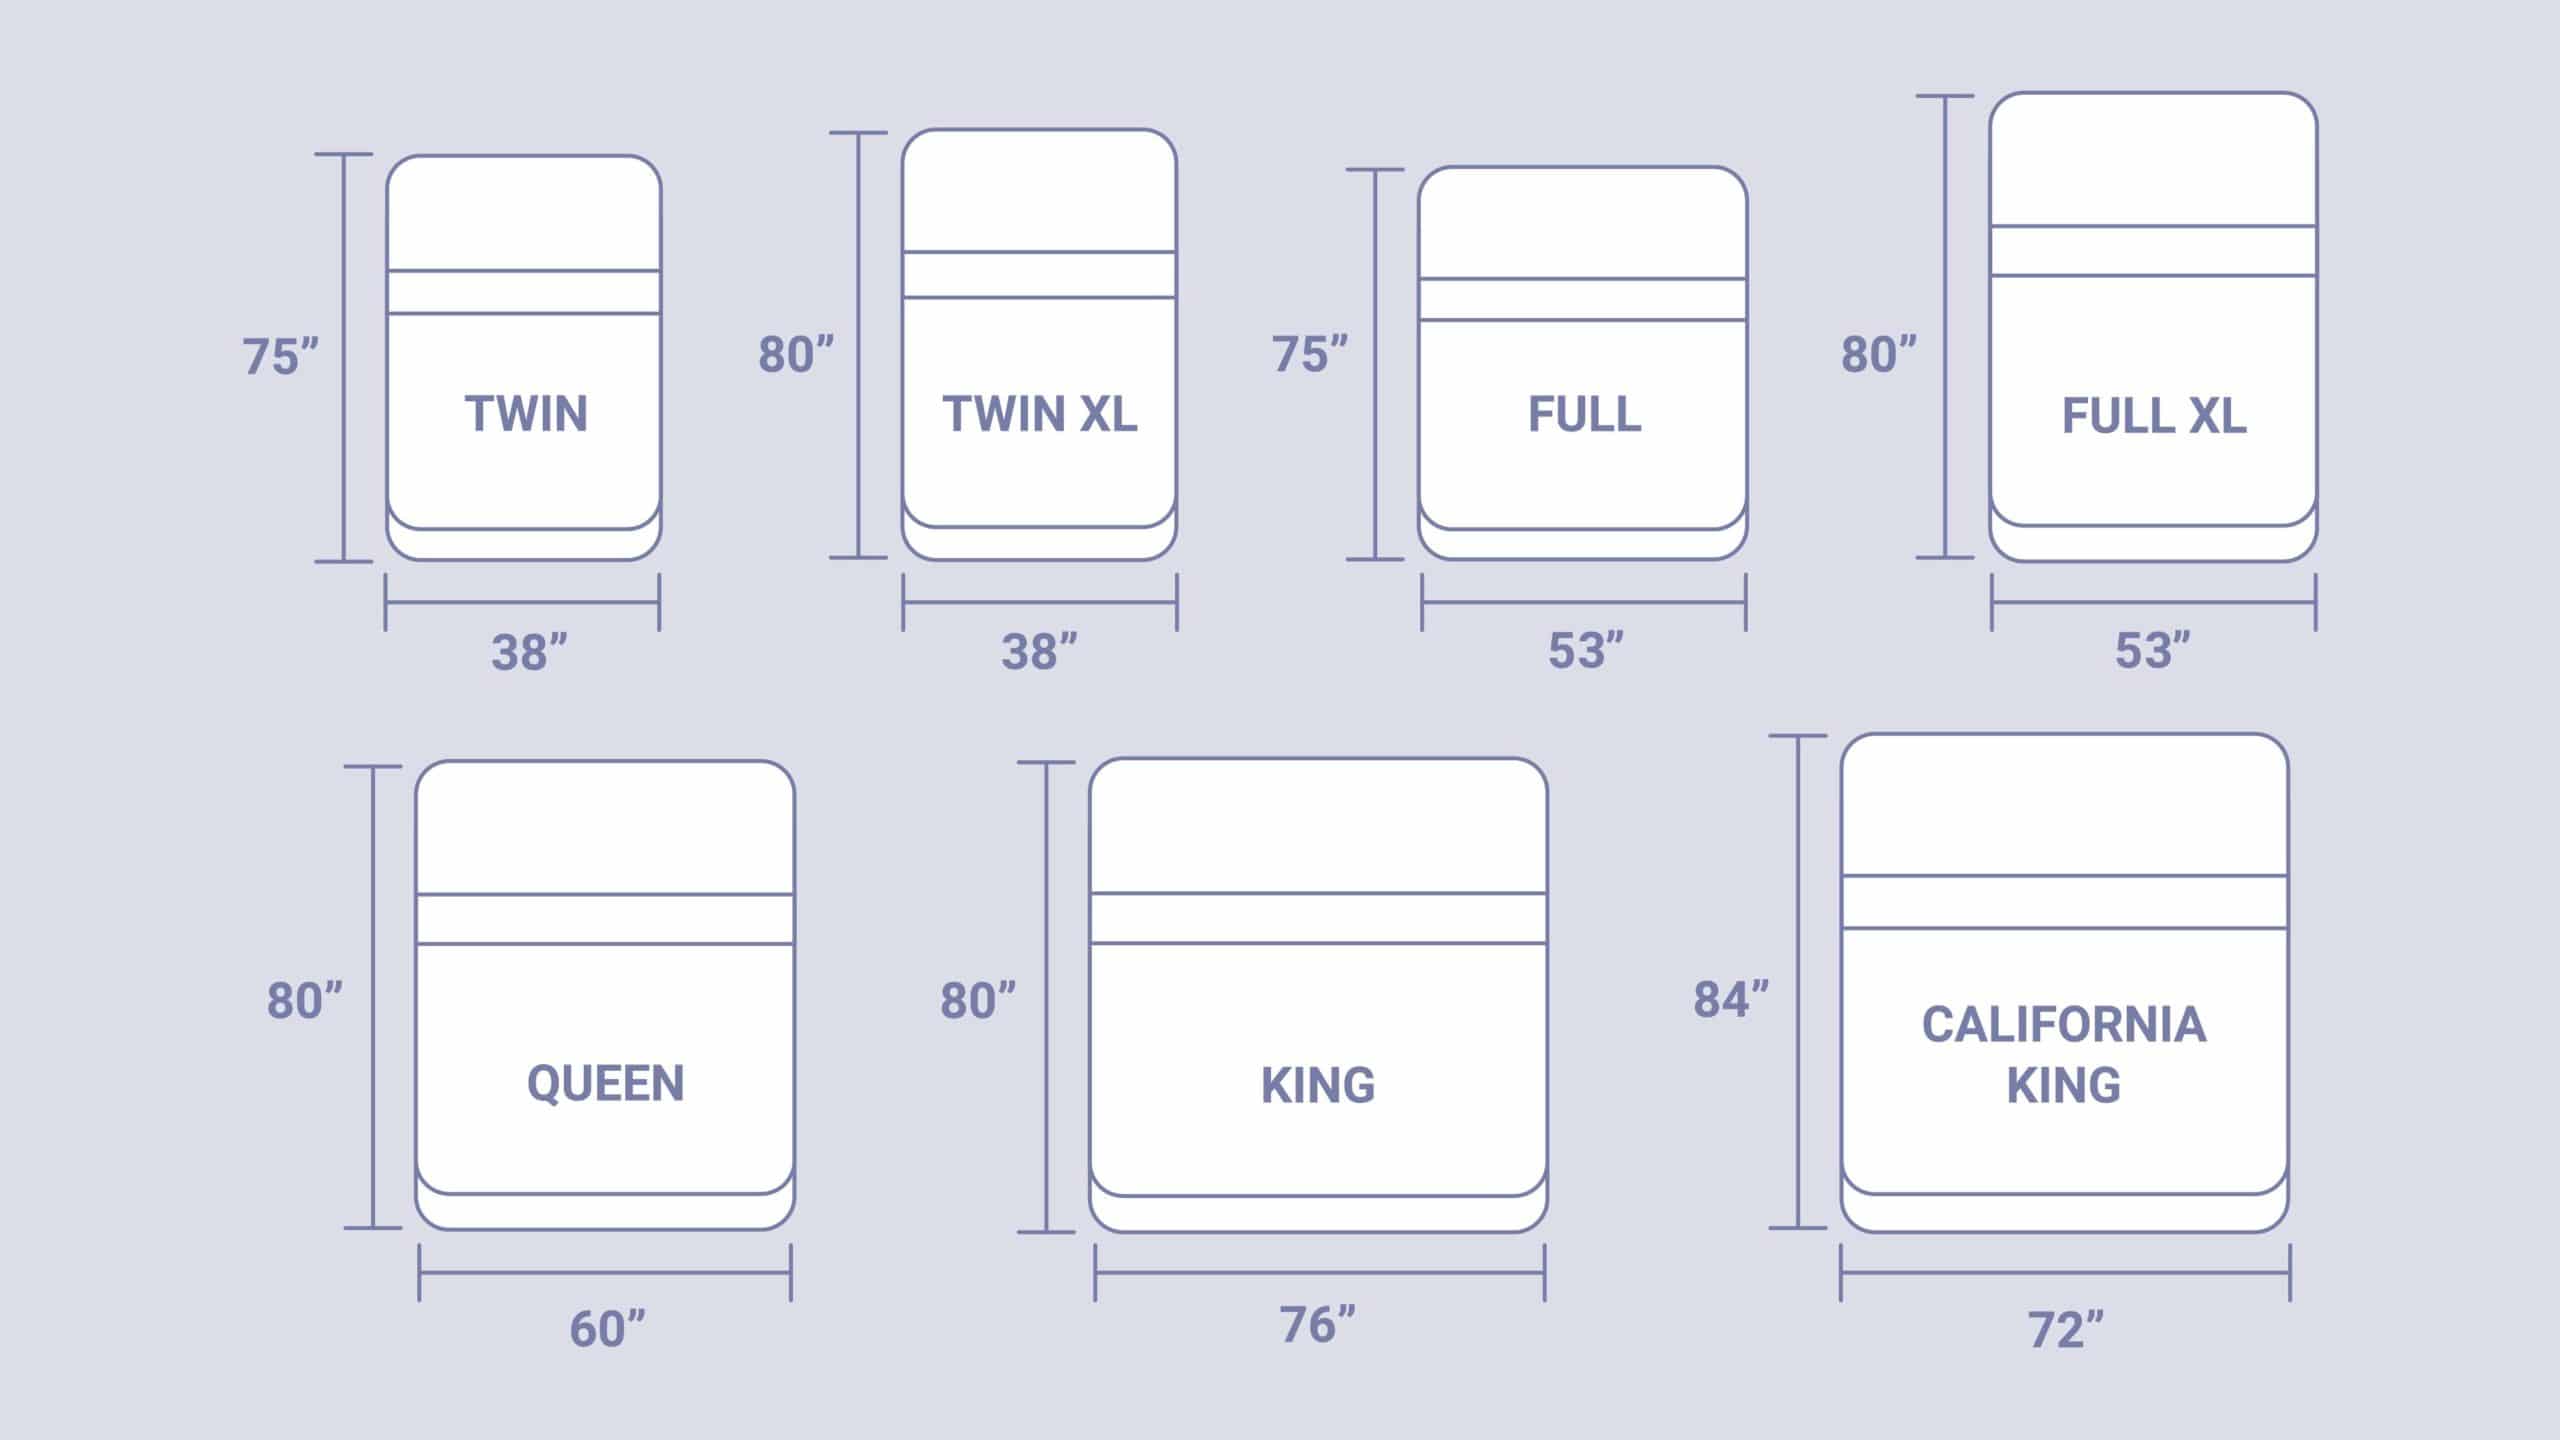 Mattress Sizes And Dimensions Guide, Asia King Size Bed Dimension